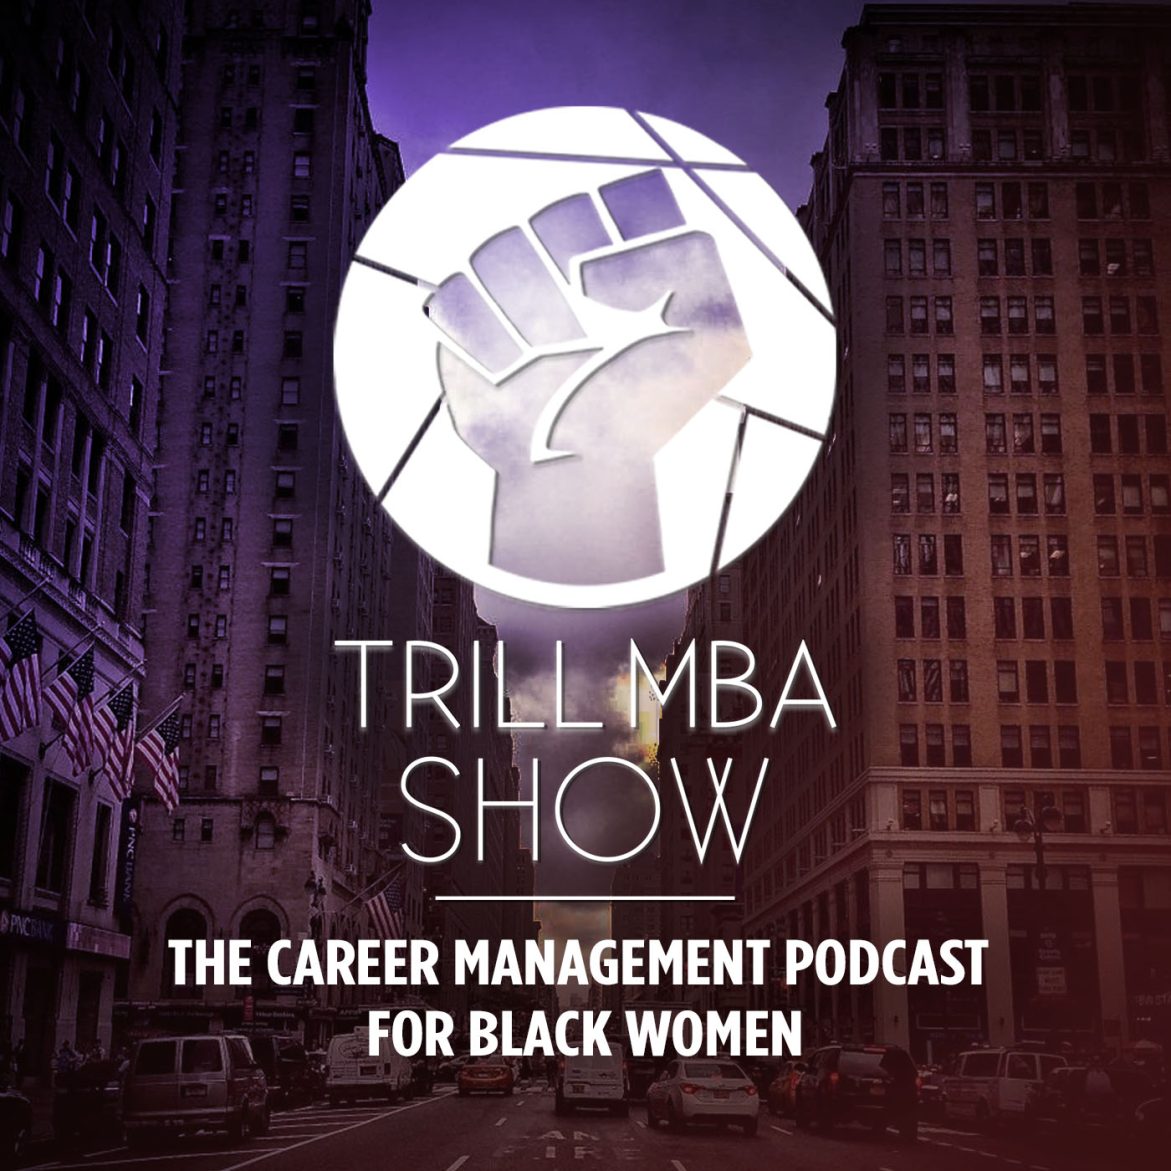 Black Podcasting - Navigating Career Changes: How To Change Industries and Functions